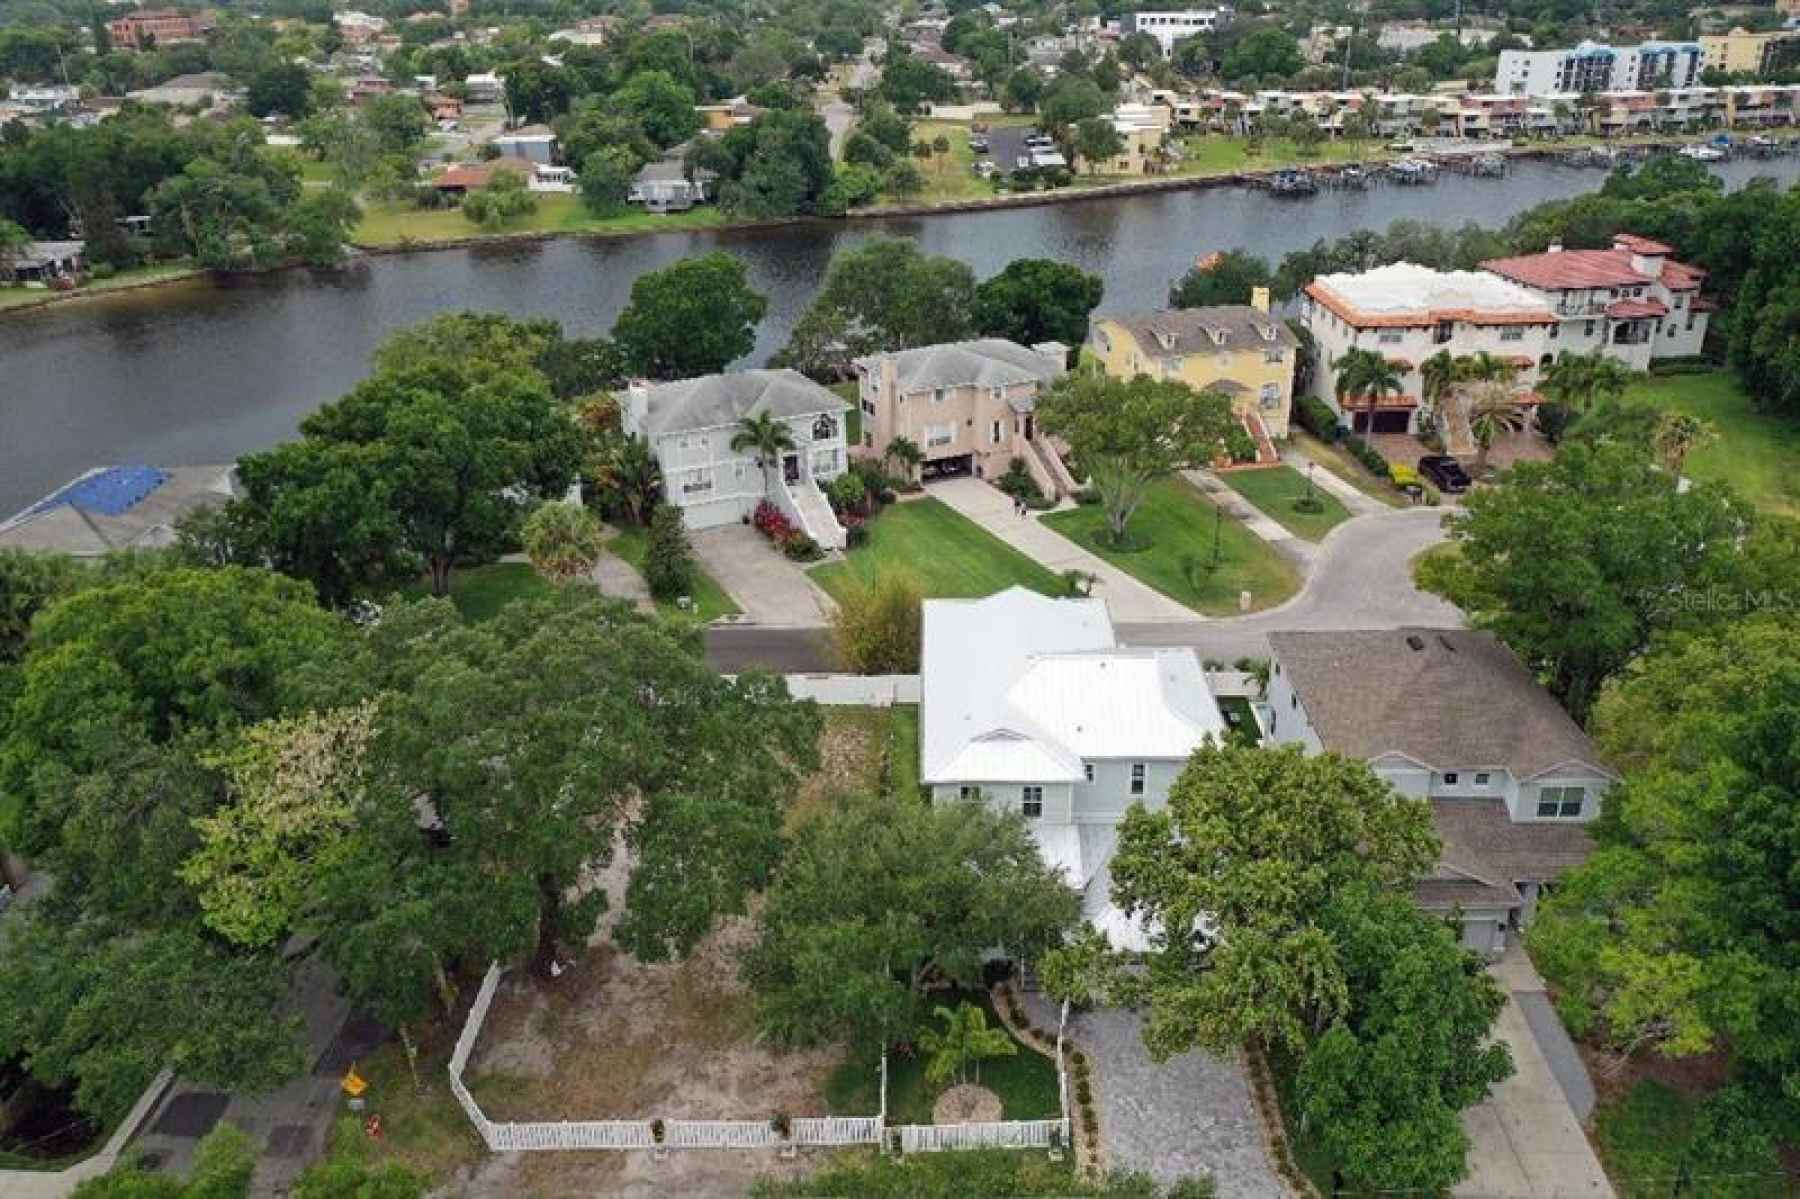 West Ariel of The Hillsborough River and The Subject Lot